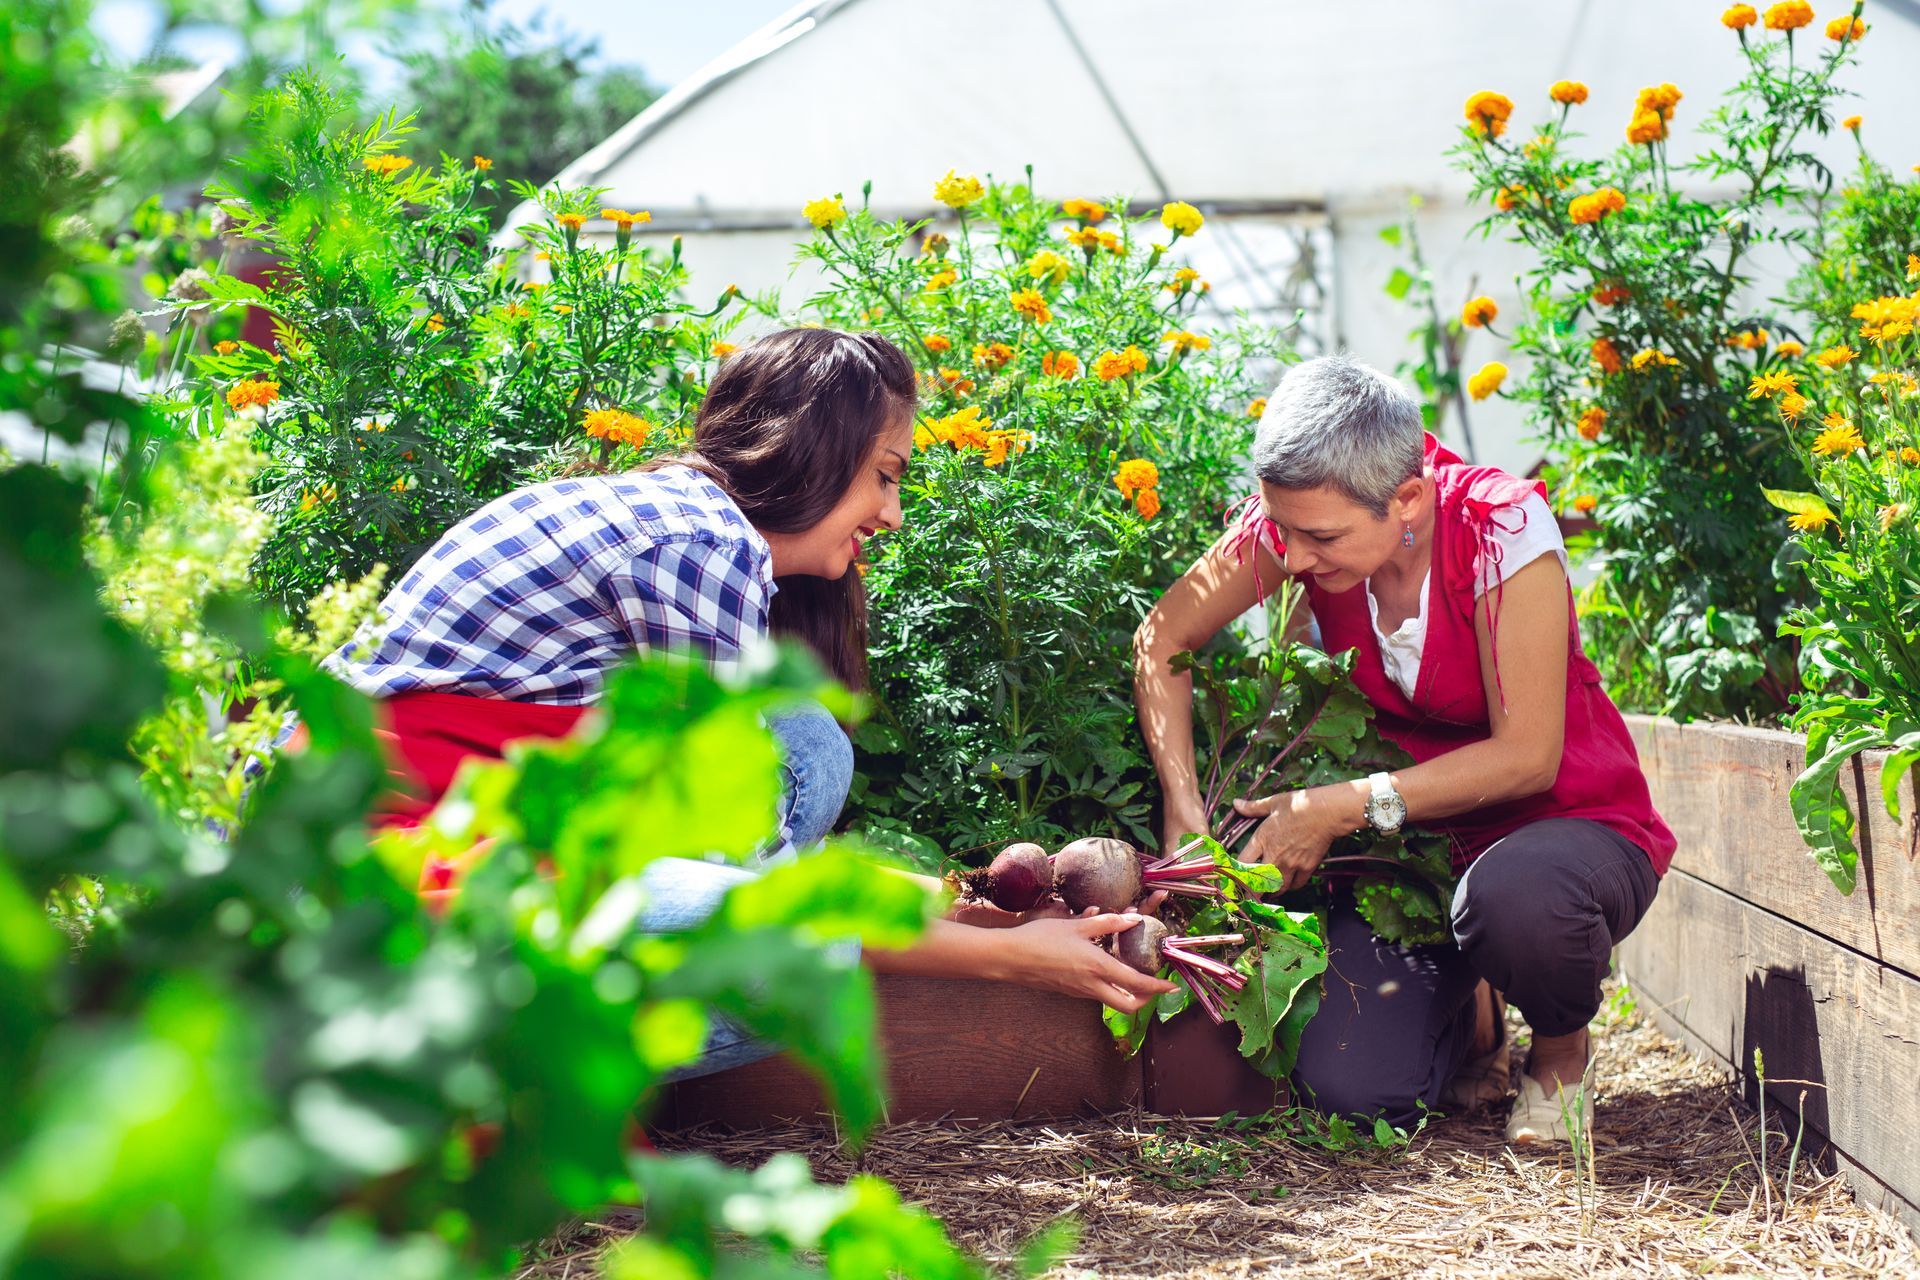 Two women are working in a garden together.